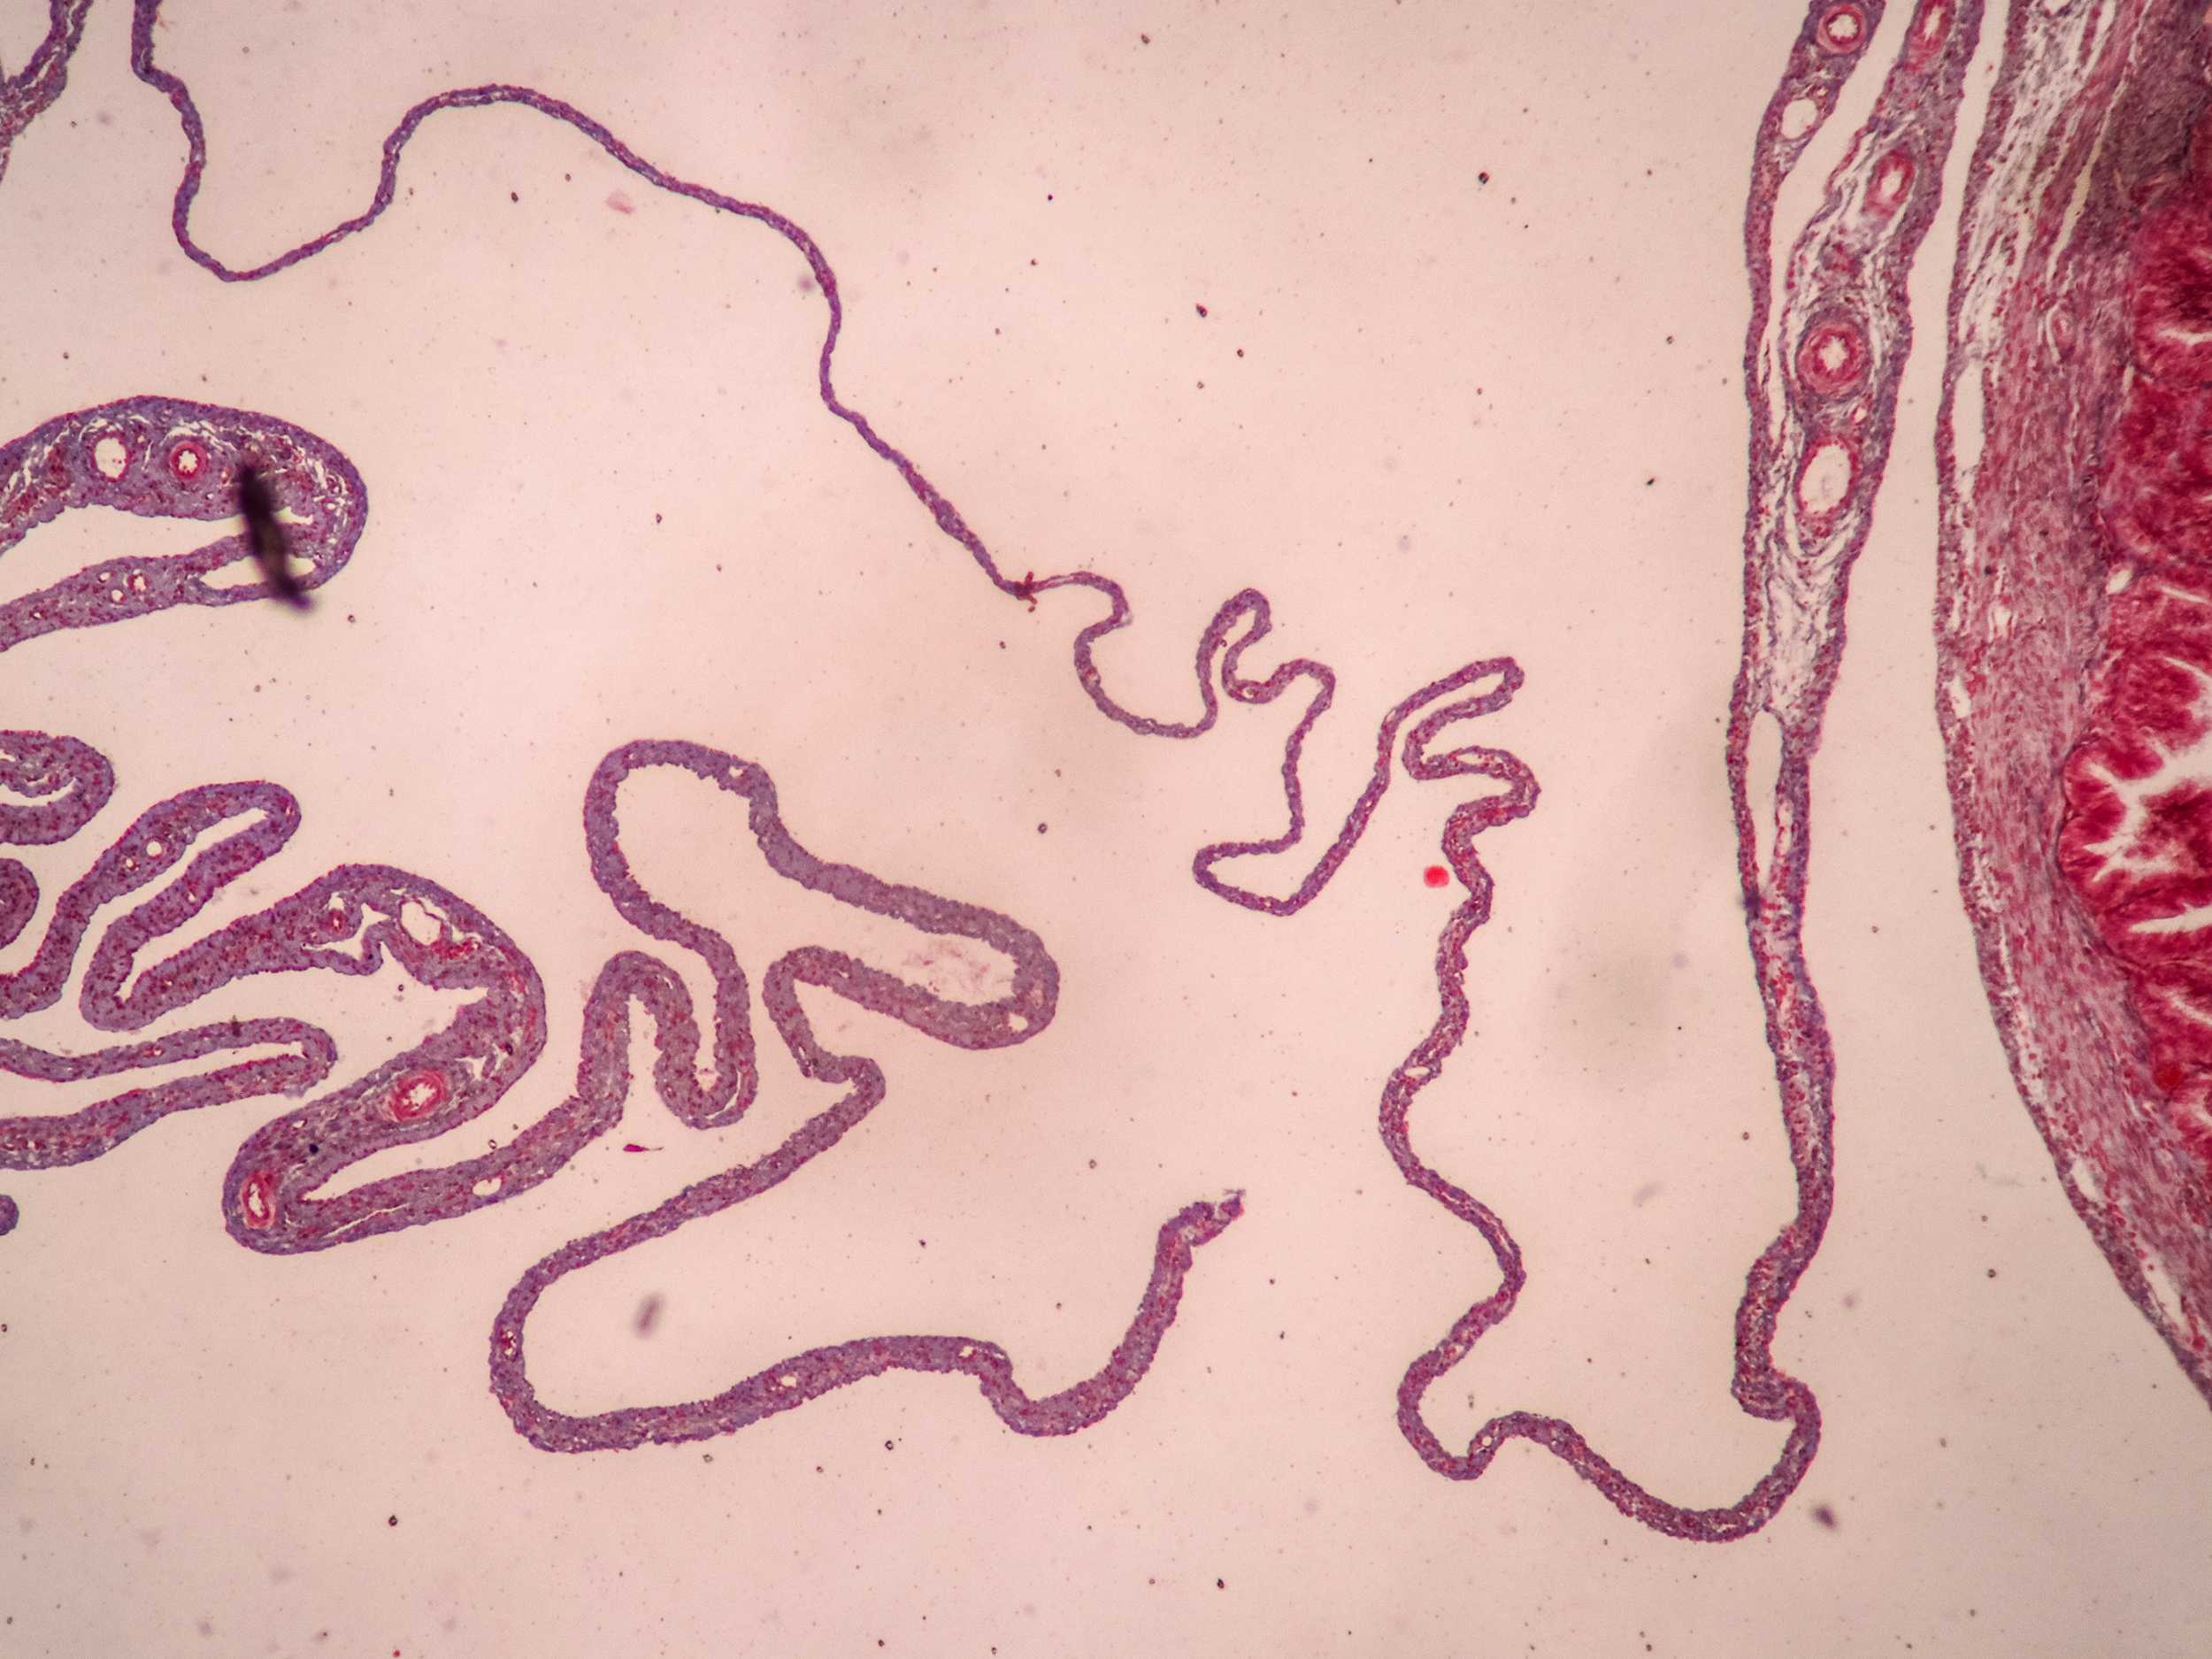 Placenta and umbilical cord under a microscope